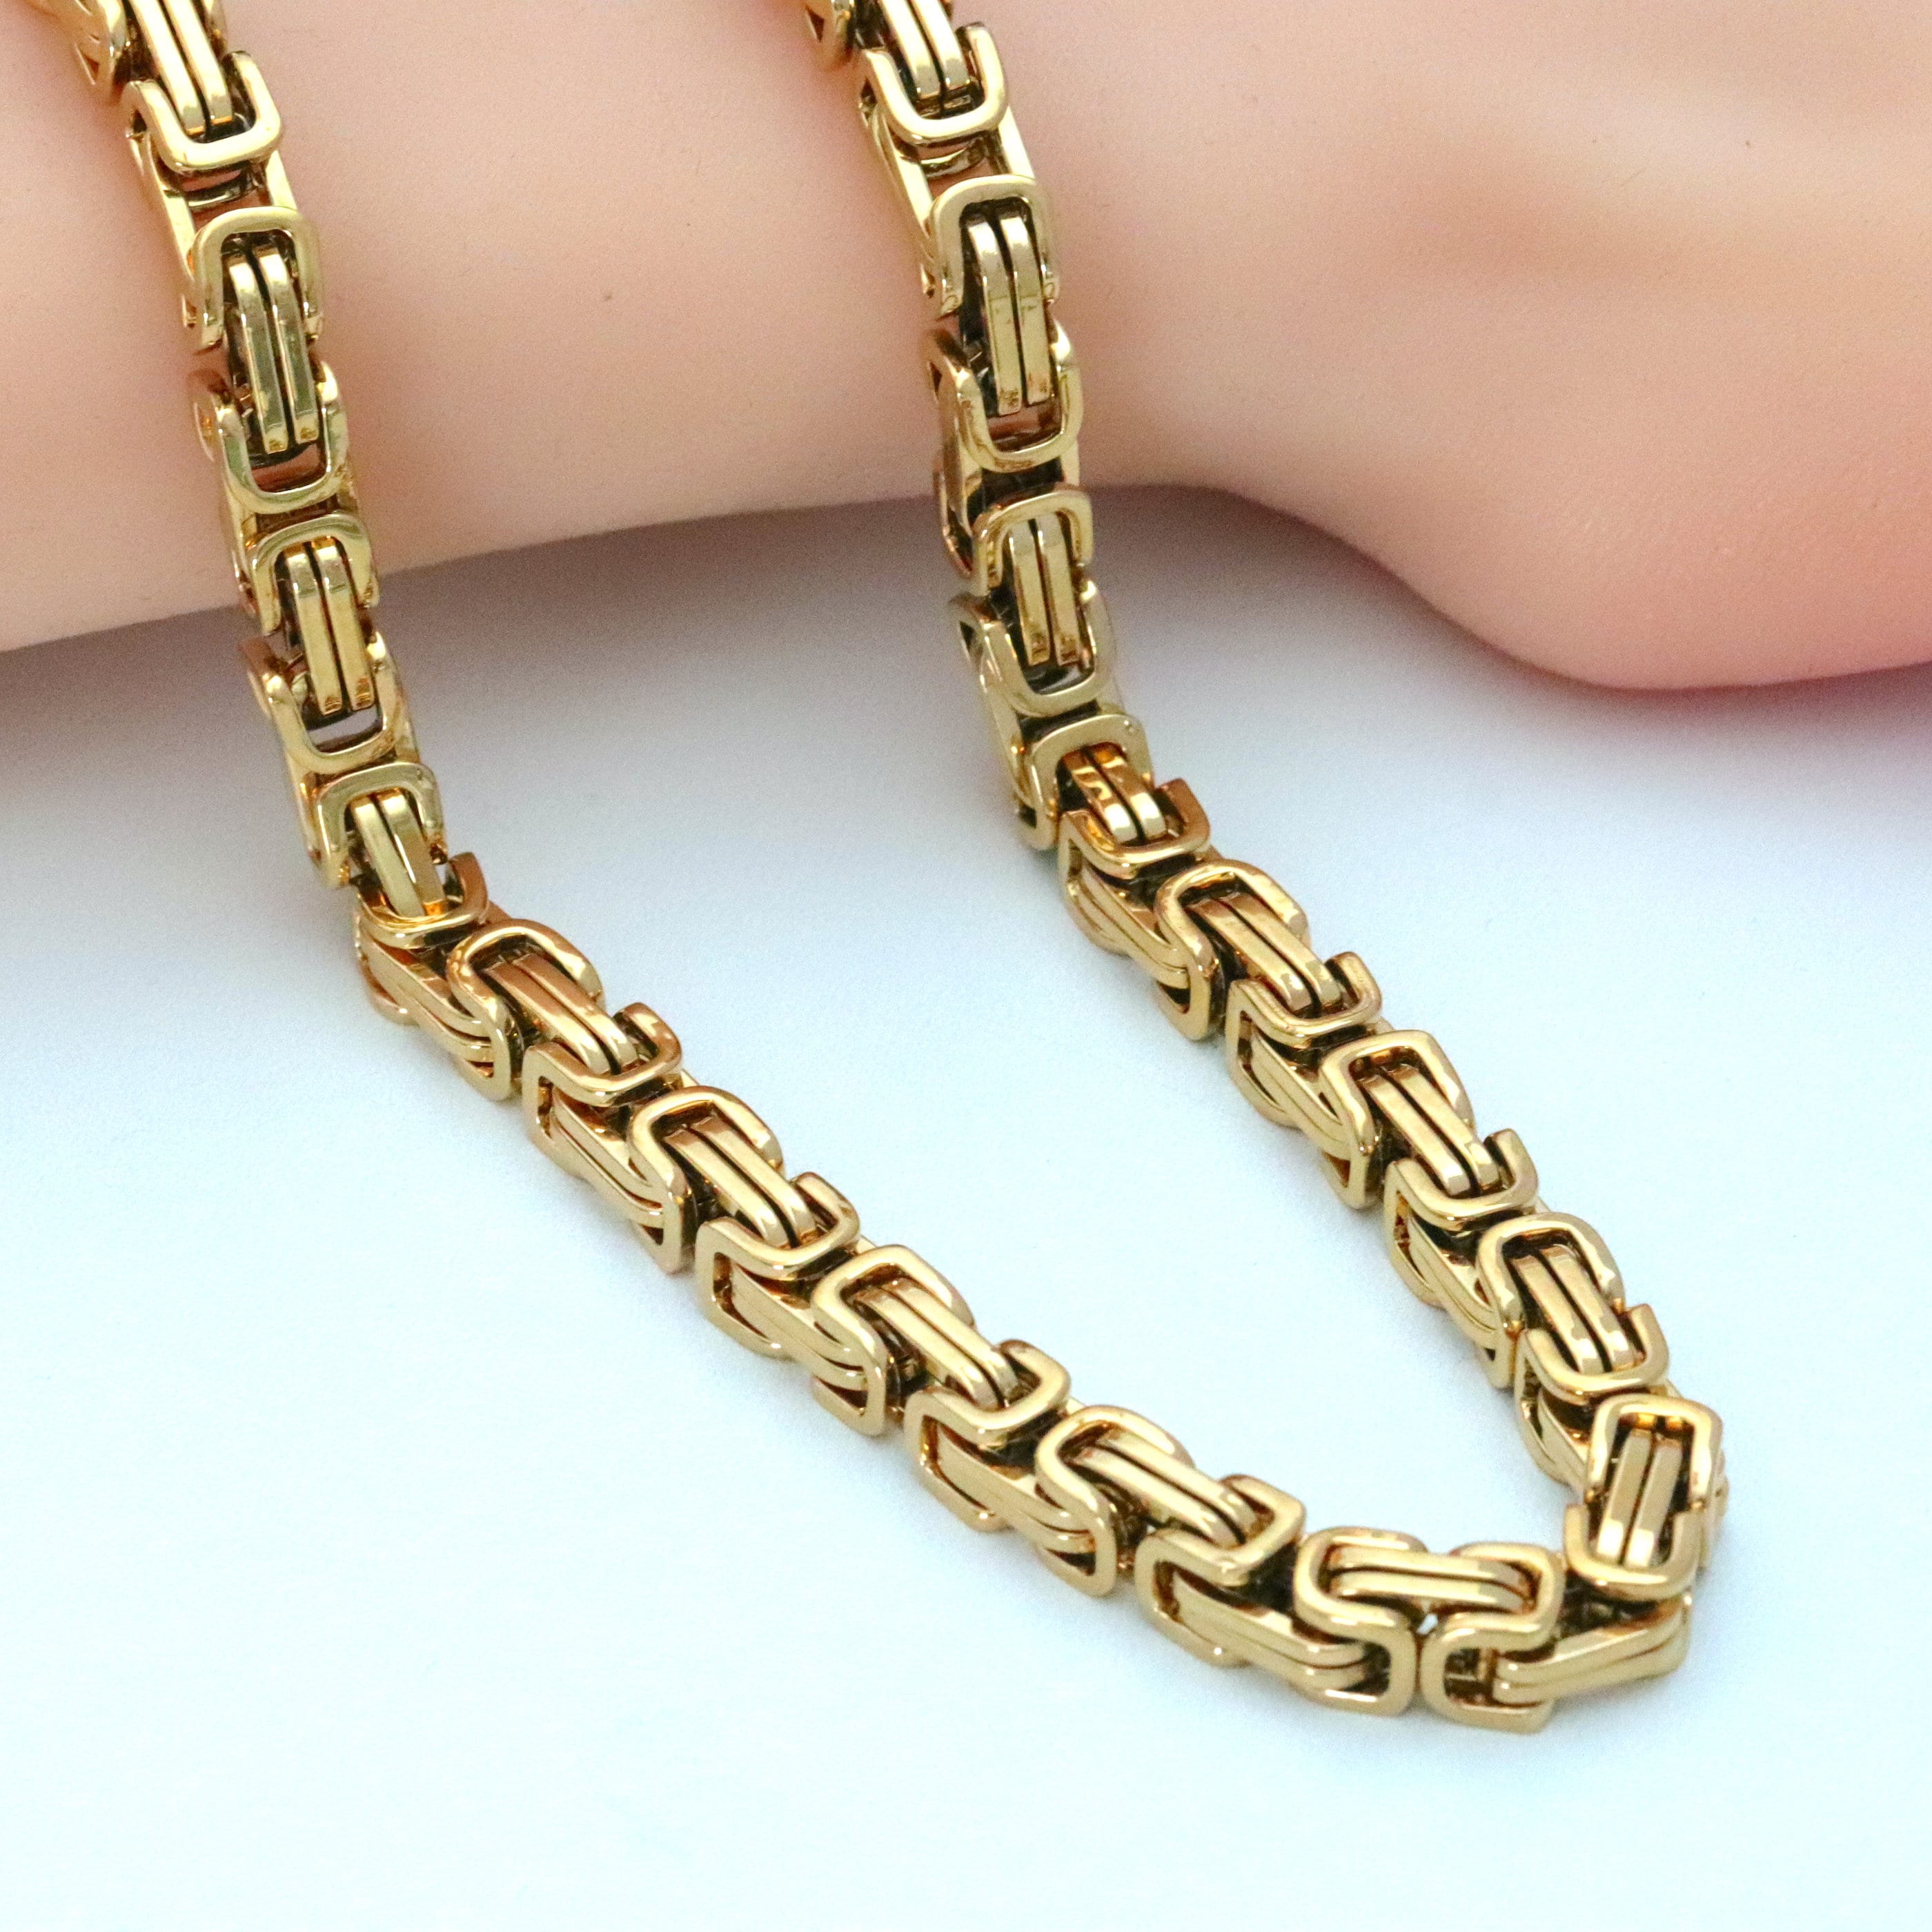 Necklaces Stainless Steel Byzantine Chain Necklace Chn8500 4mm / 18 Wholesale Jewelry Website Unisex